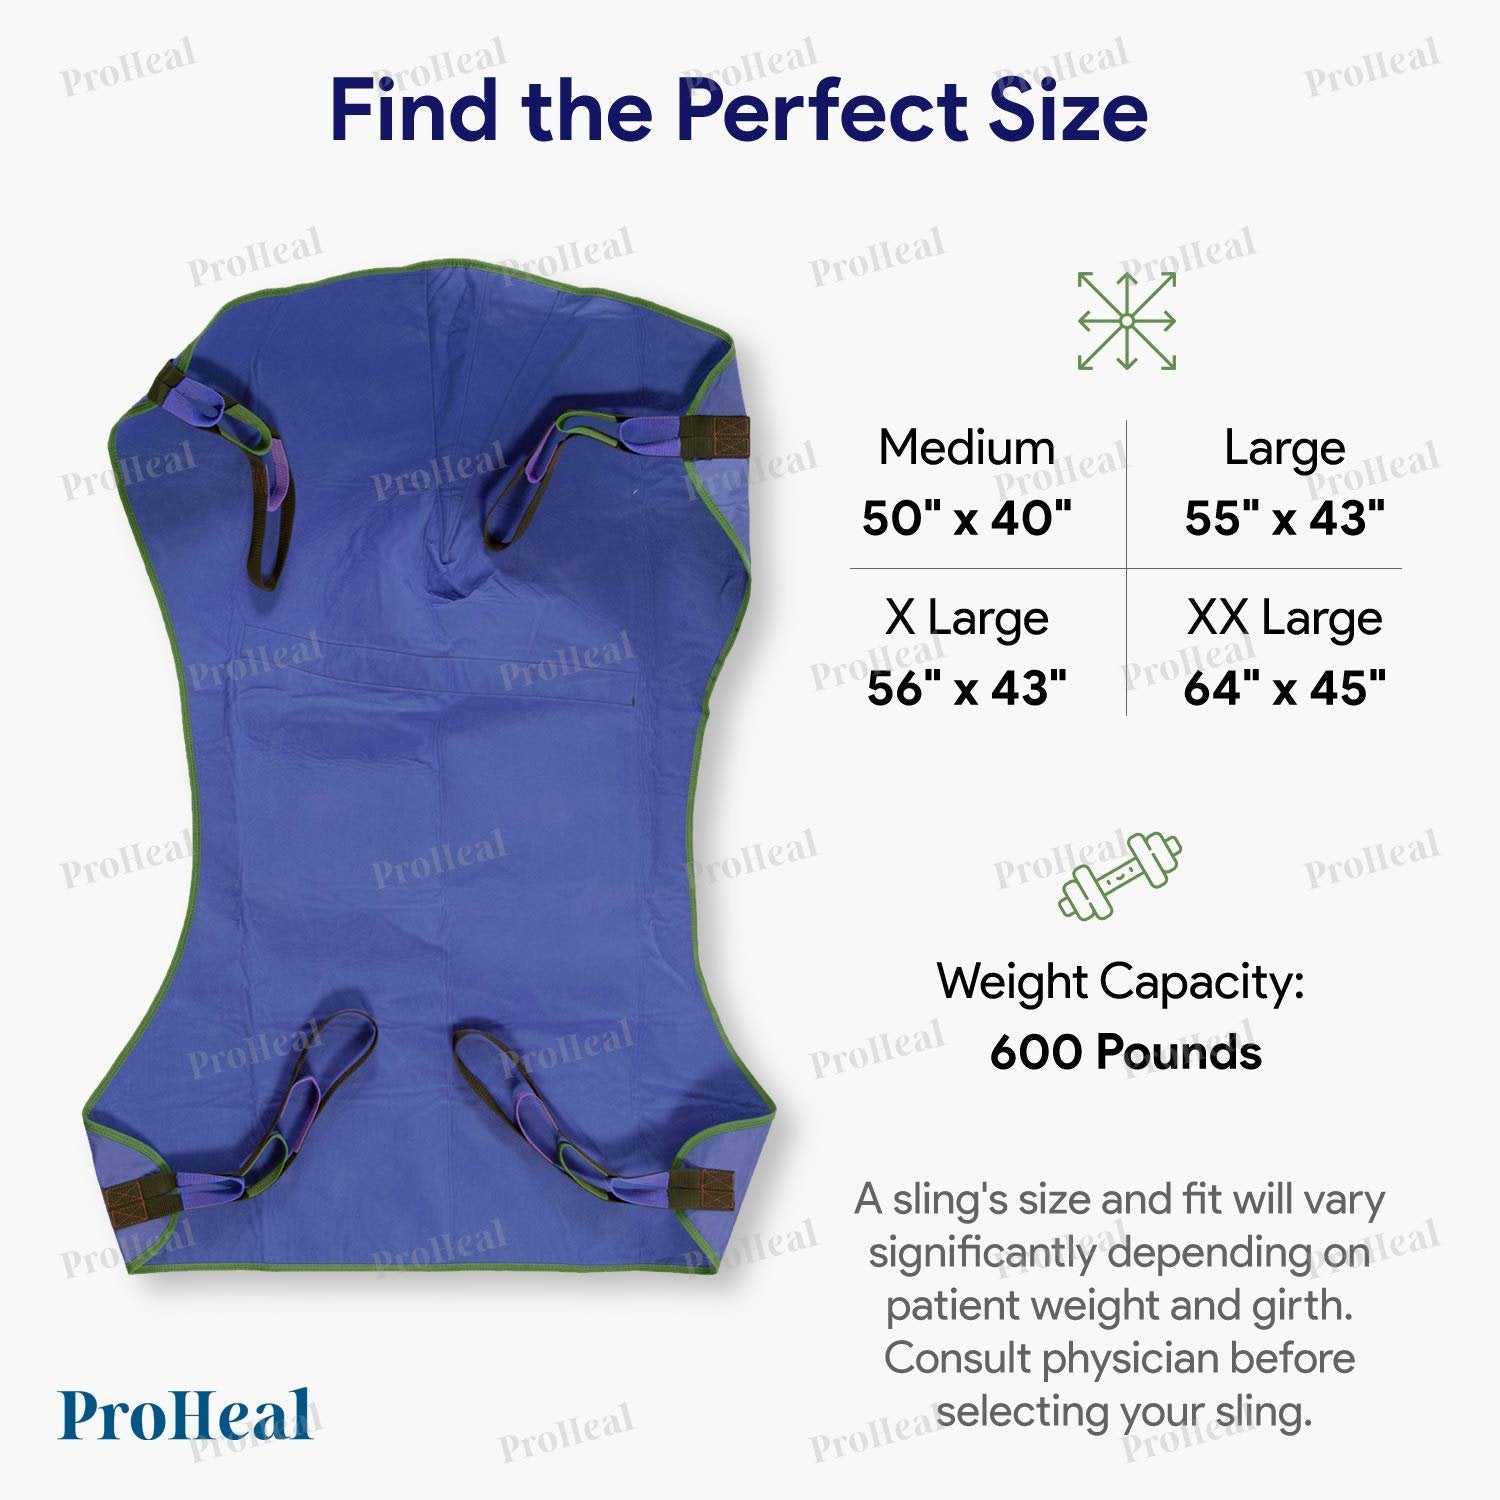 ProHeal Universal Full Body Lift Sling, Medium, 50"L x 40" - Solid Fabric Polyester Slings for Patient Lifts - Compatible with Hoyer, Invacare, McKesson, Drive, Lumex, Medline, Joerns and More